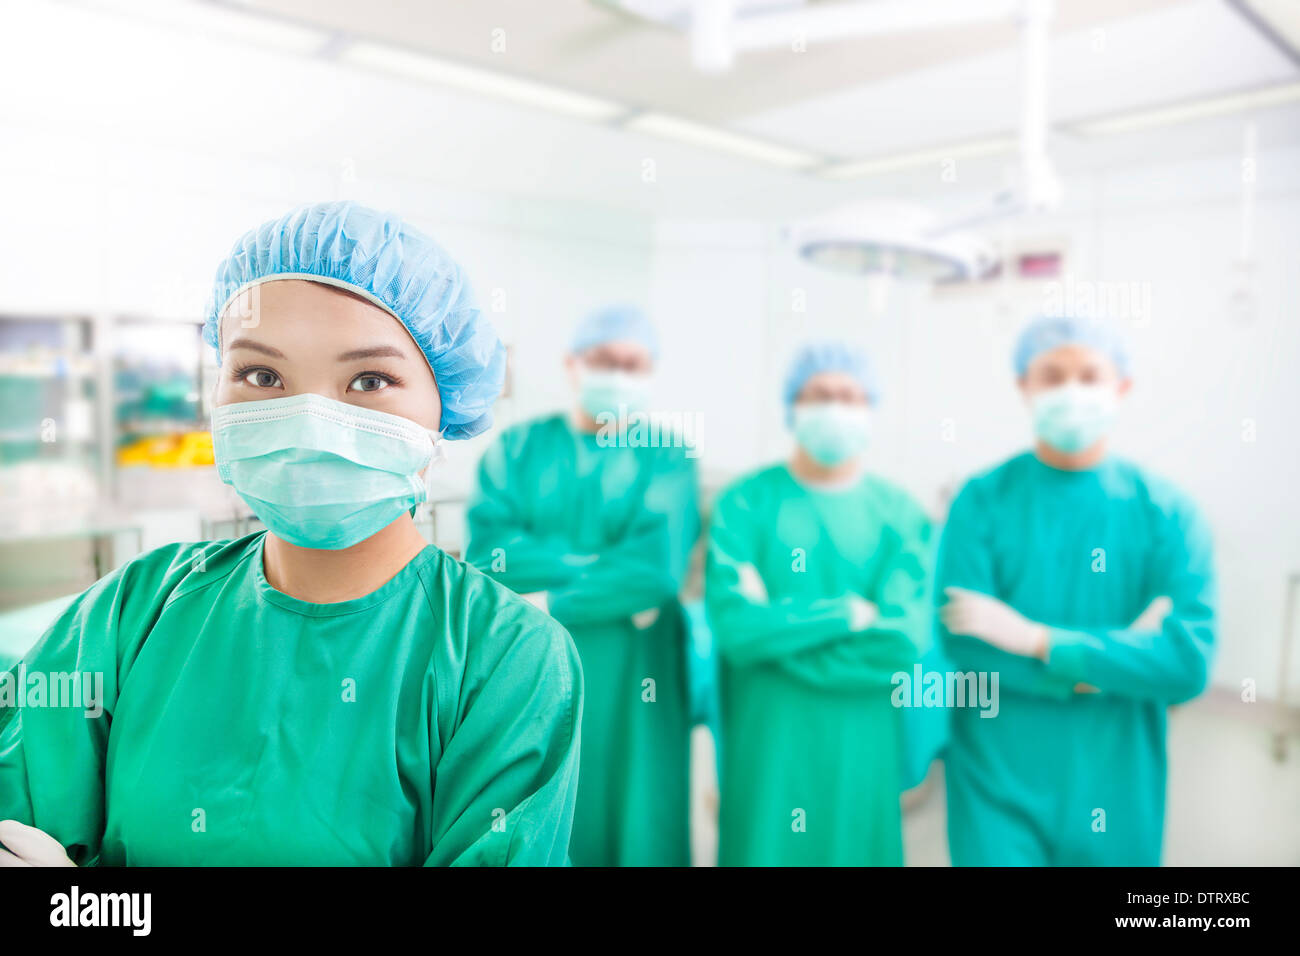 Smiling surgeon posing with aesthetic medicine teams in a operating room Stock Photo